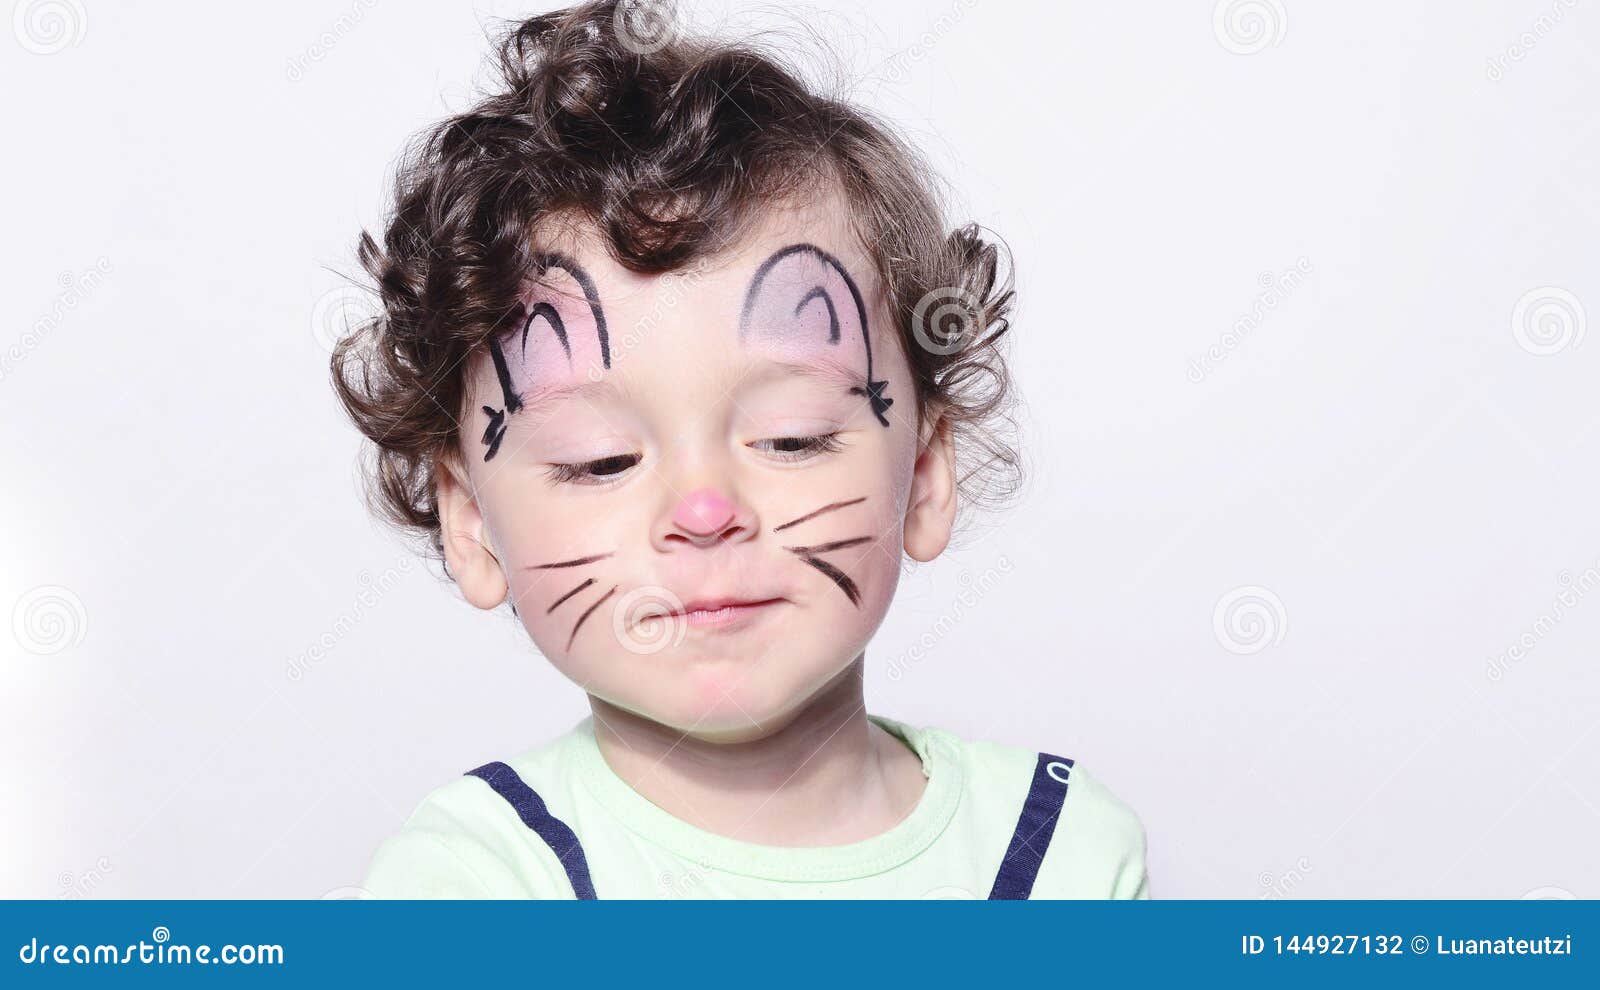 Kid with Mouse Face Mask Face Painting Stock Photo - Image of ...